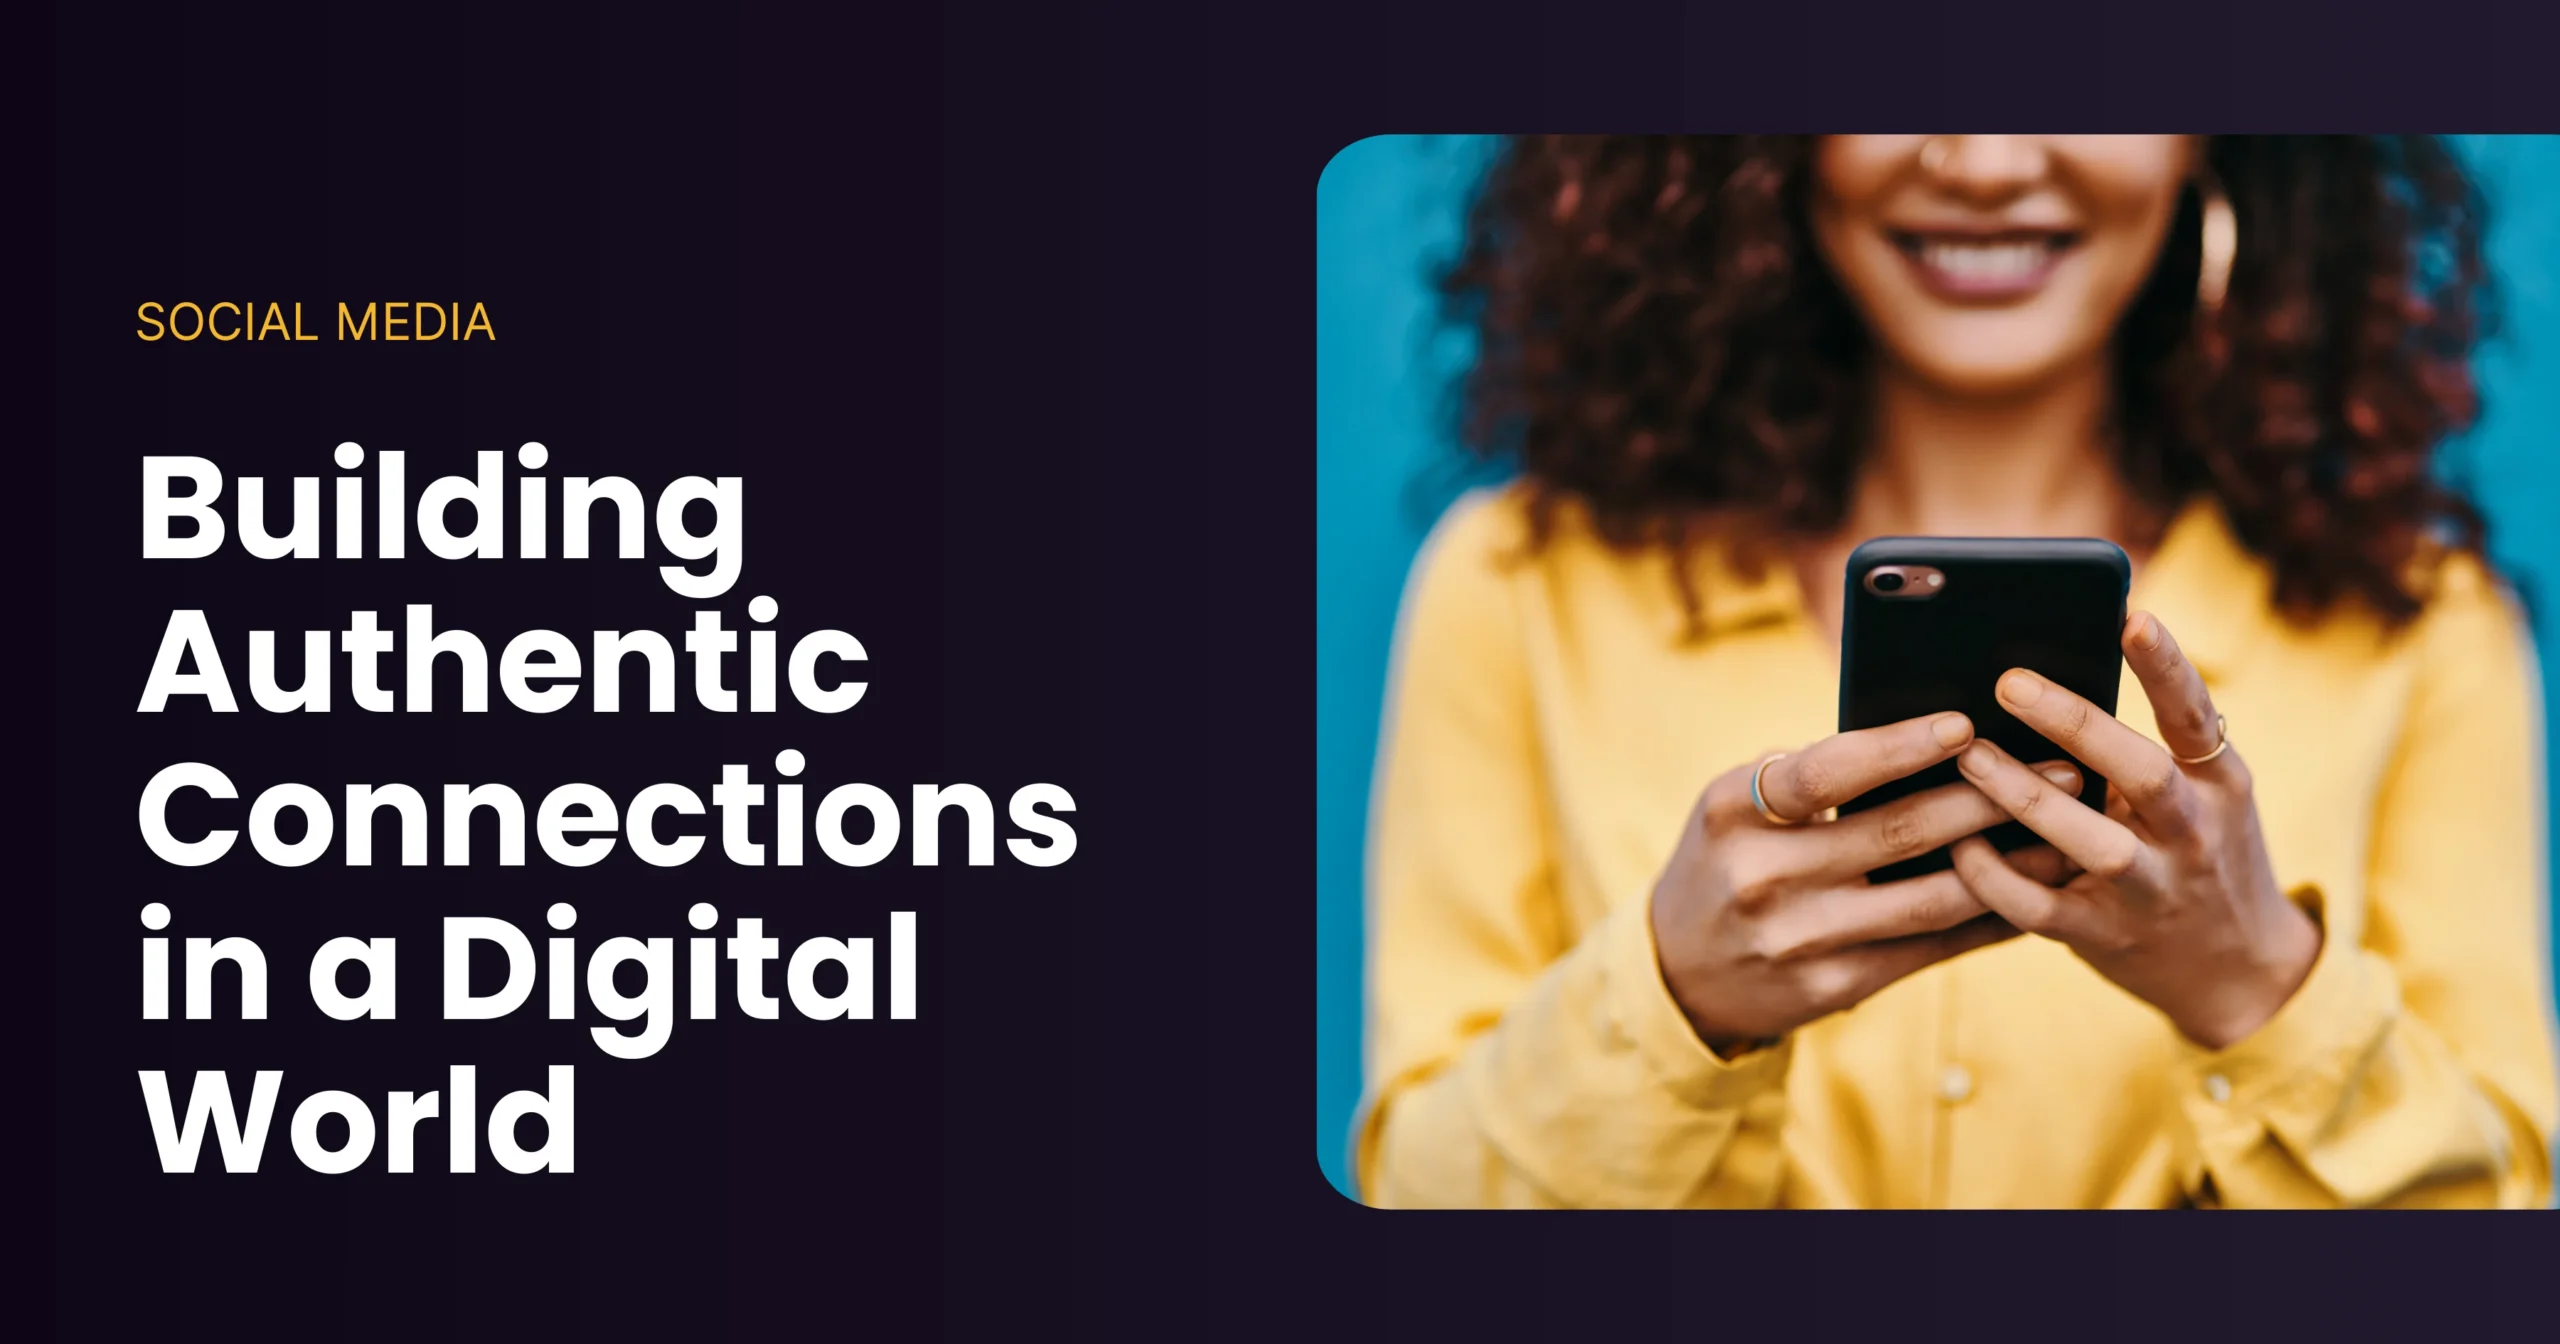 Building Authentic Connections in a Digital World